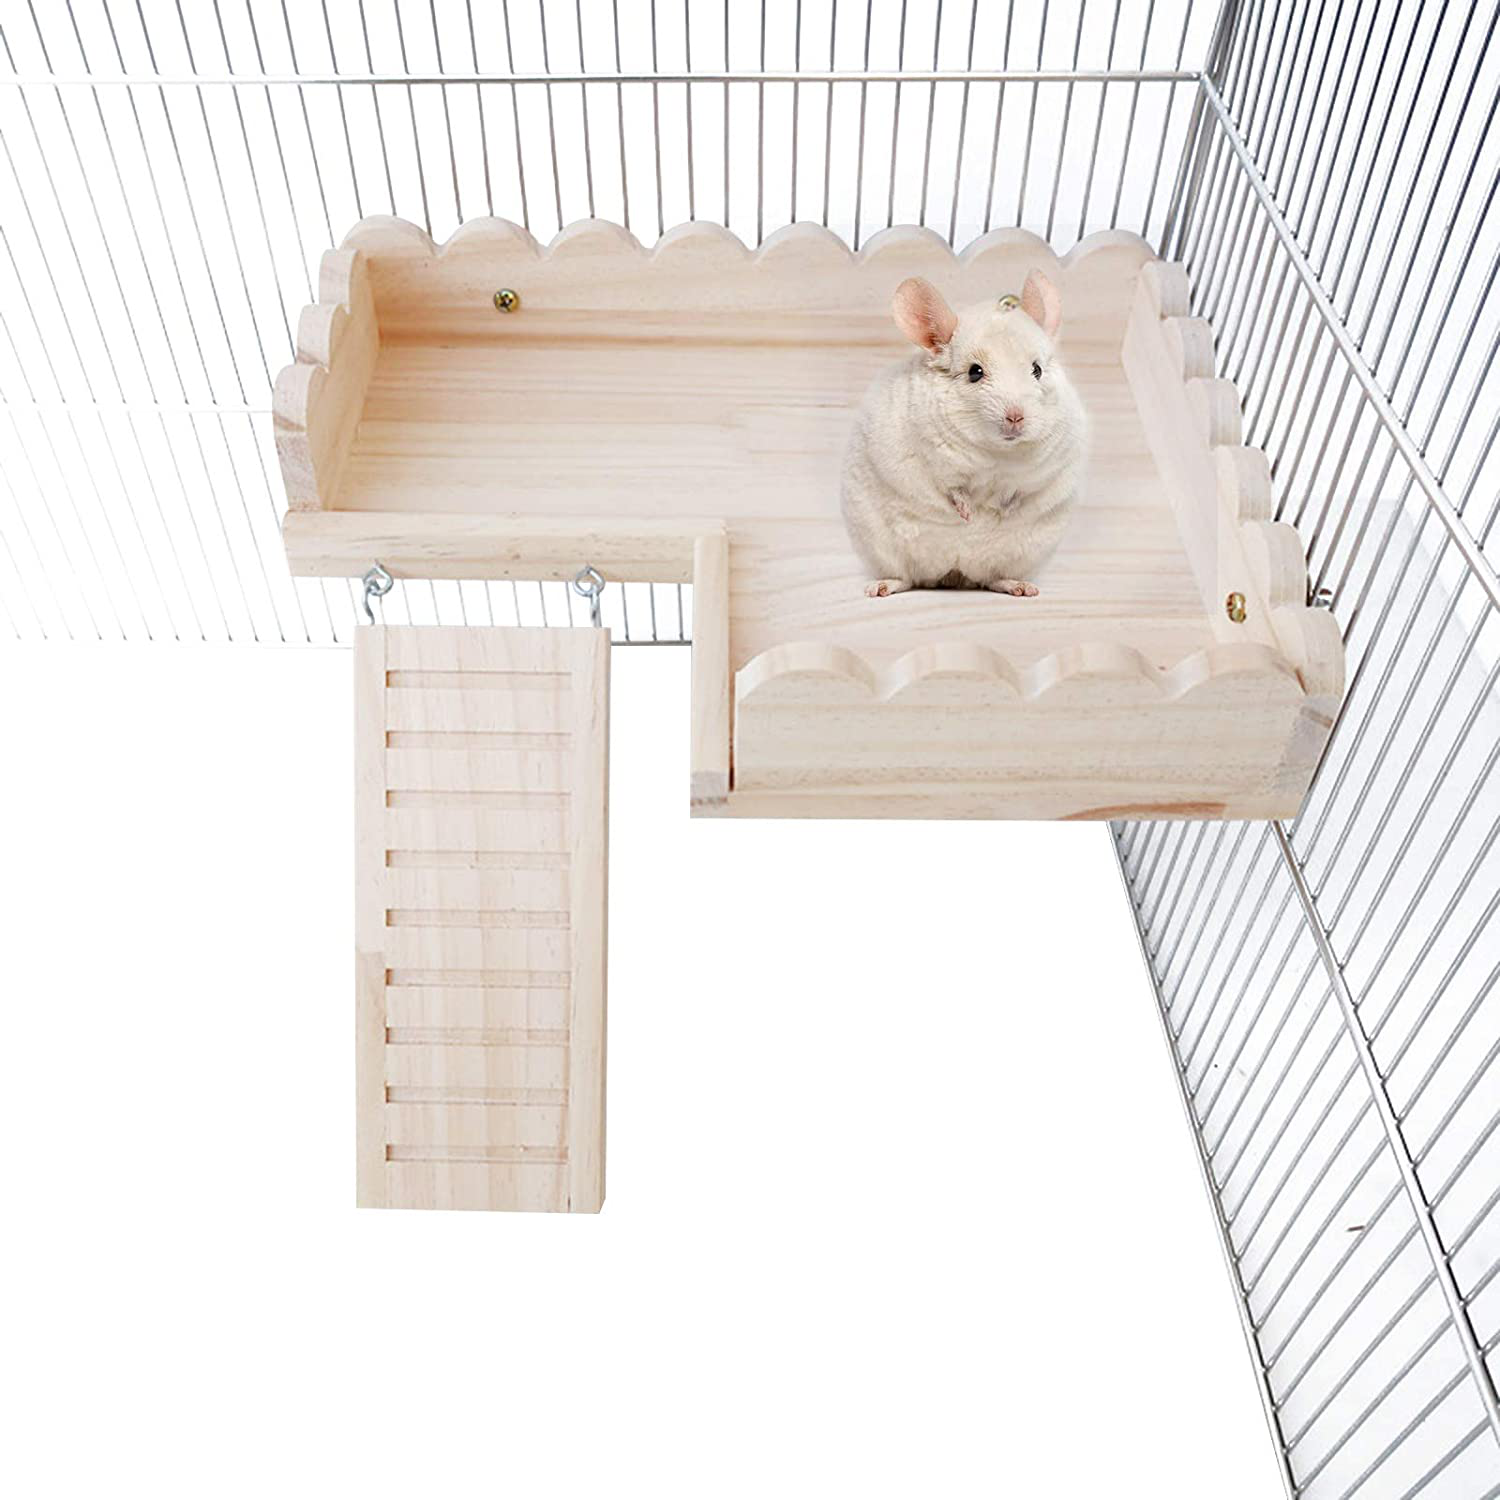 ROZKITCH Hamster Platform with Climbing Ladder, Bird Perch Cage Toy Wooden Play Gym Stand, Natural Pine Wood Tray for Chinchilla Squirrel Rabbit Guinea Pig, Birdcage Toy for Parrot Conure Parakeet